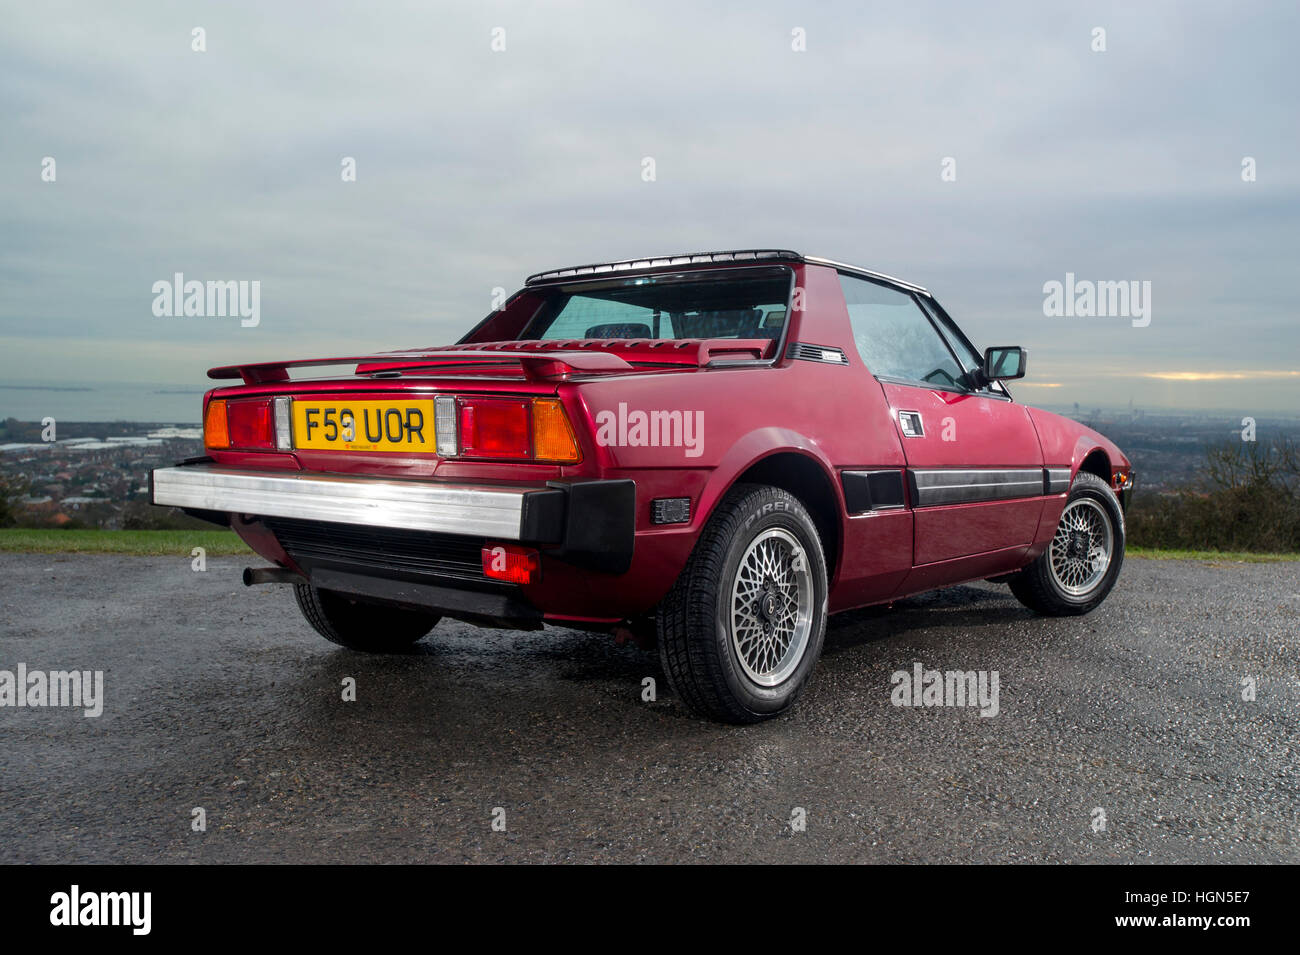 1988 Fiat X1/9 mid engined sports car, designed by Bertone Stock Photo